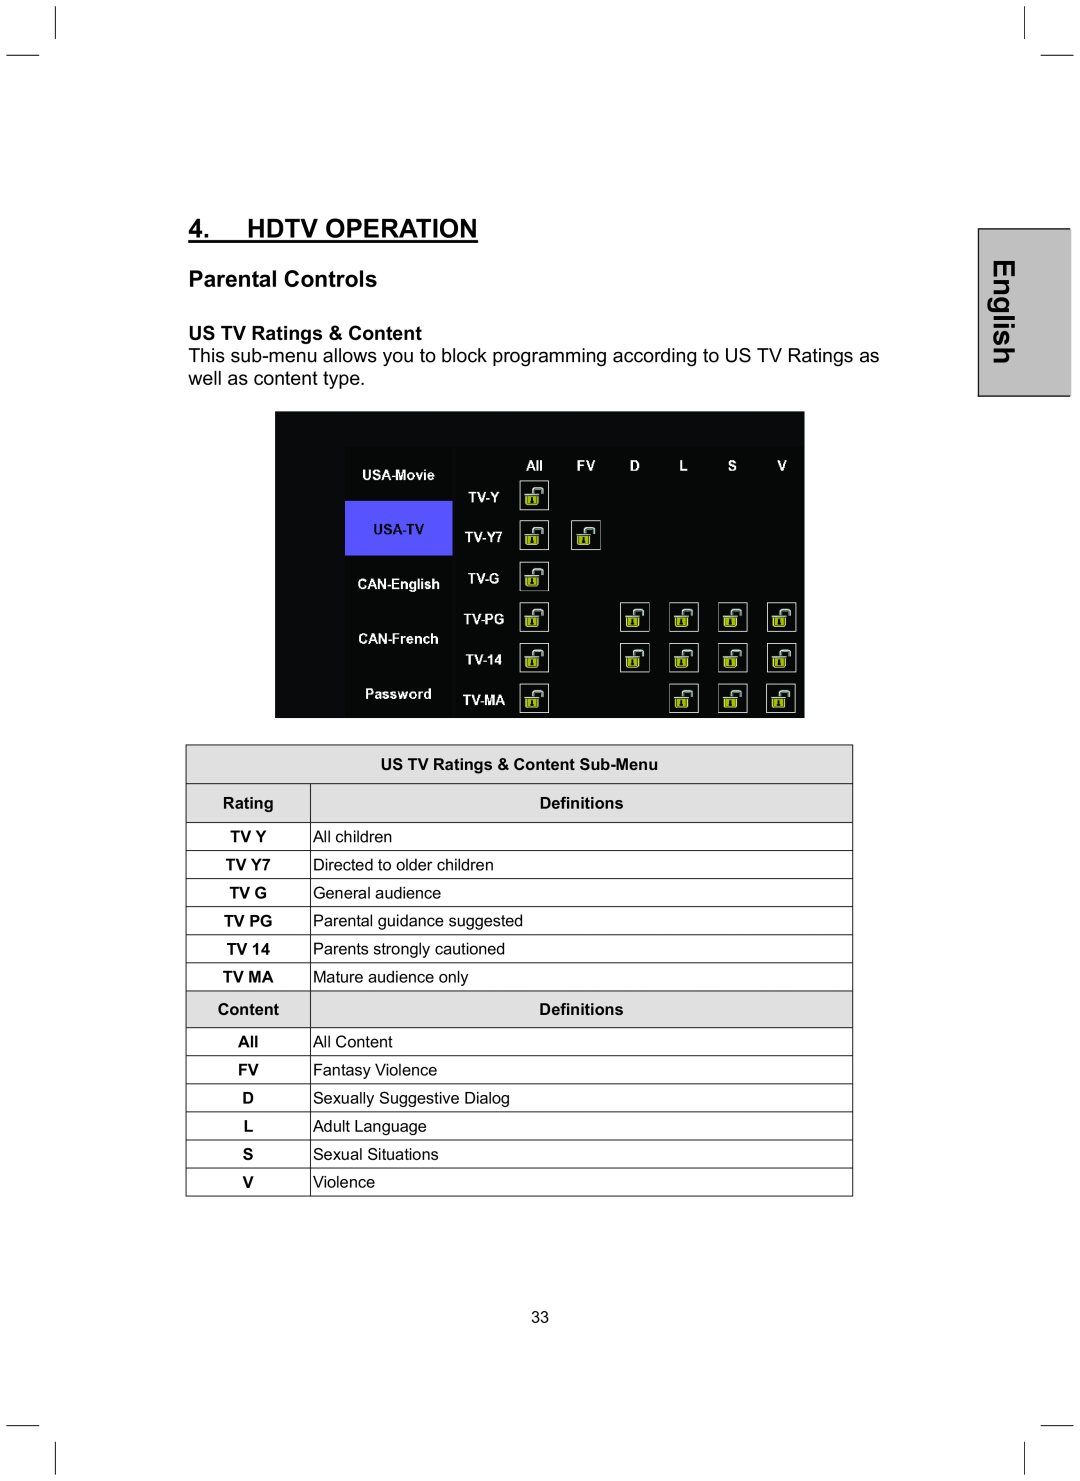 Westinghouse TX-52H480S user manual Parental Controls, US TV Ratings & Content, English, Hdtv Operation 